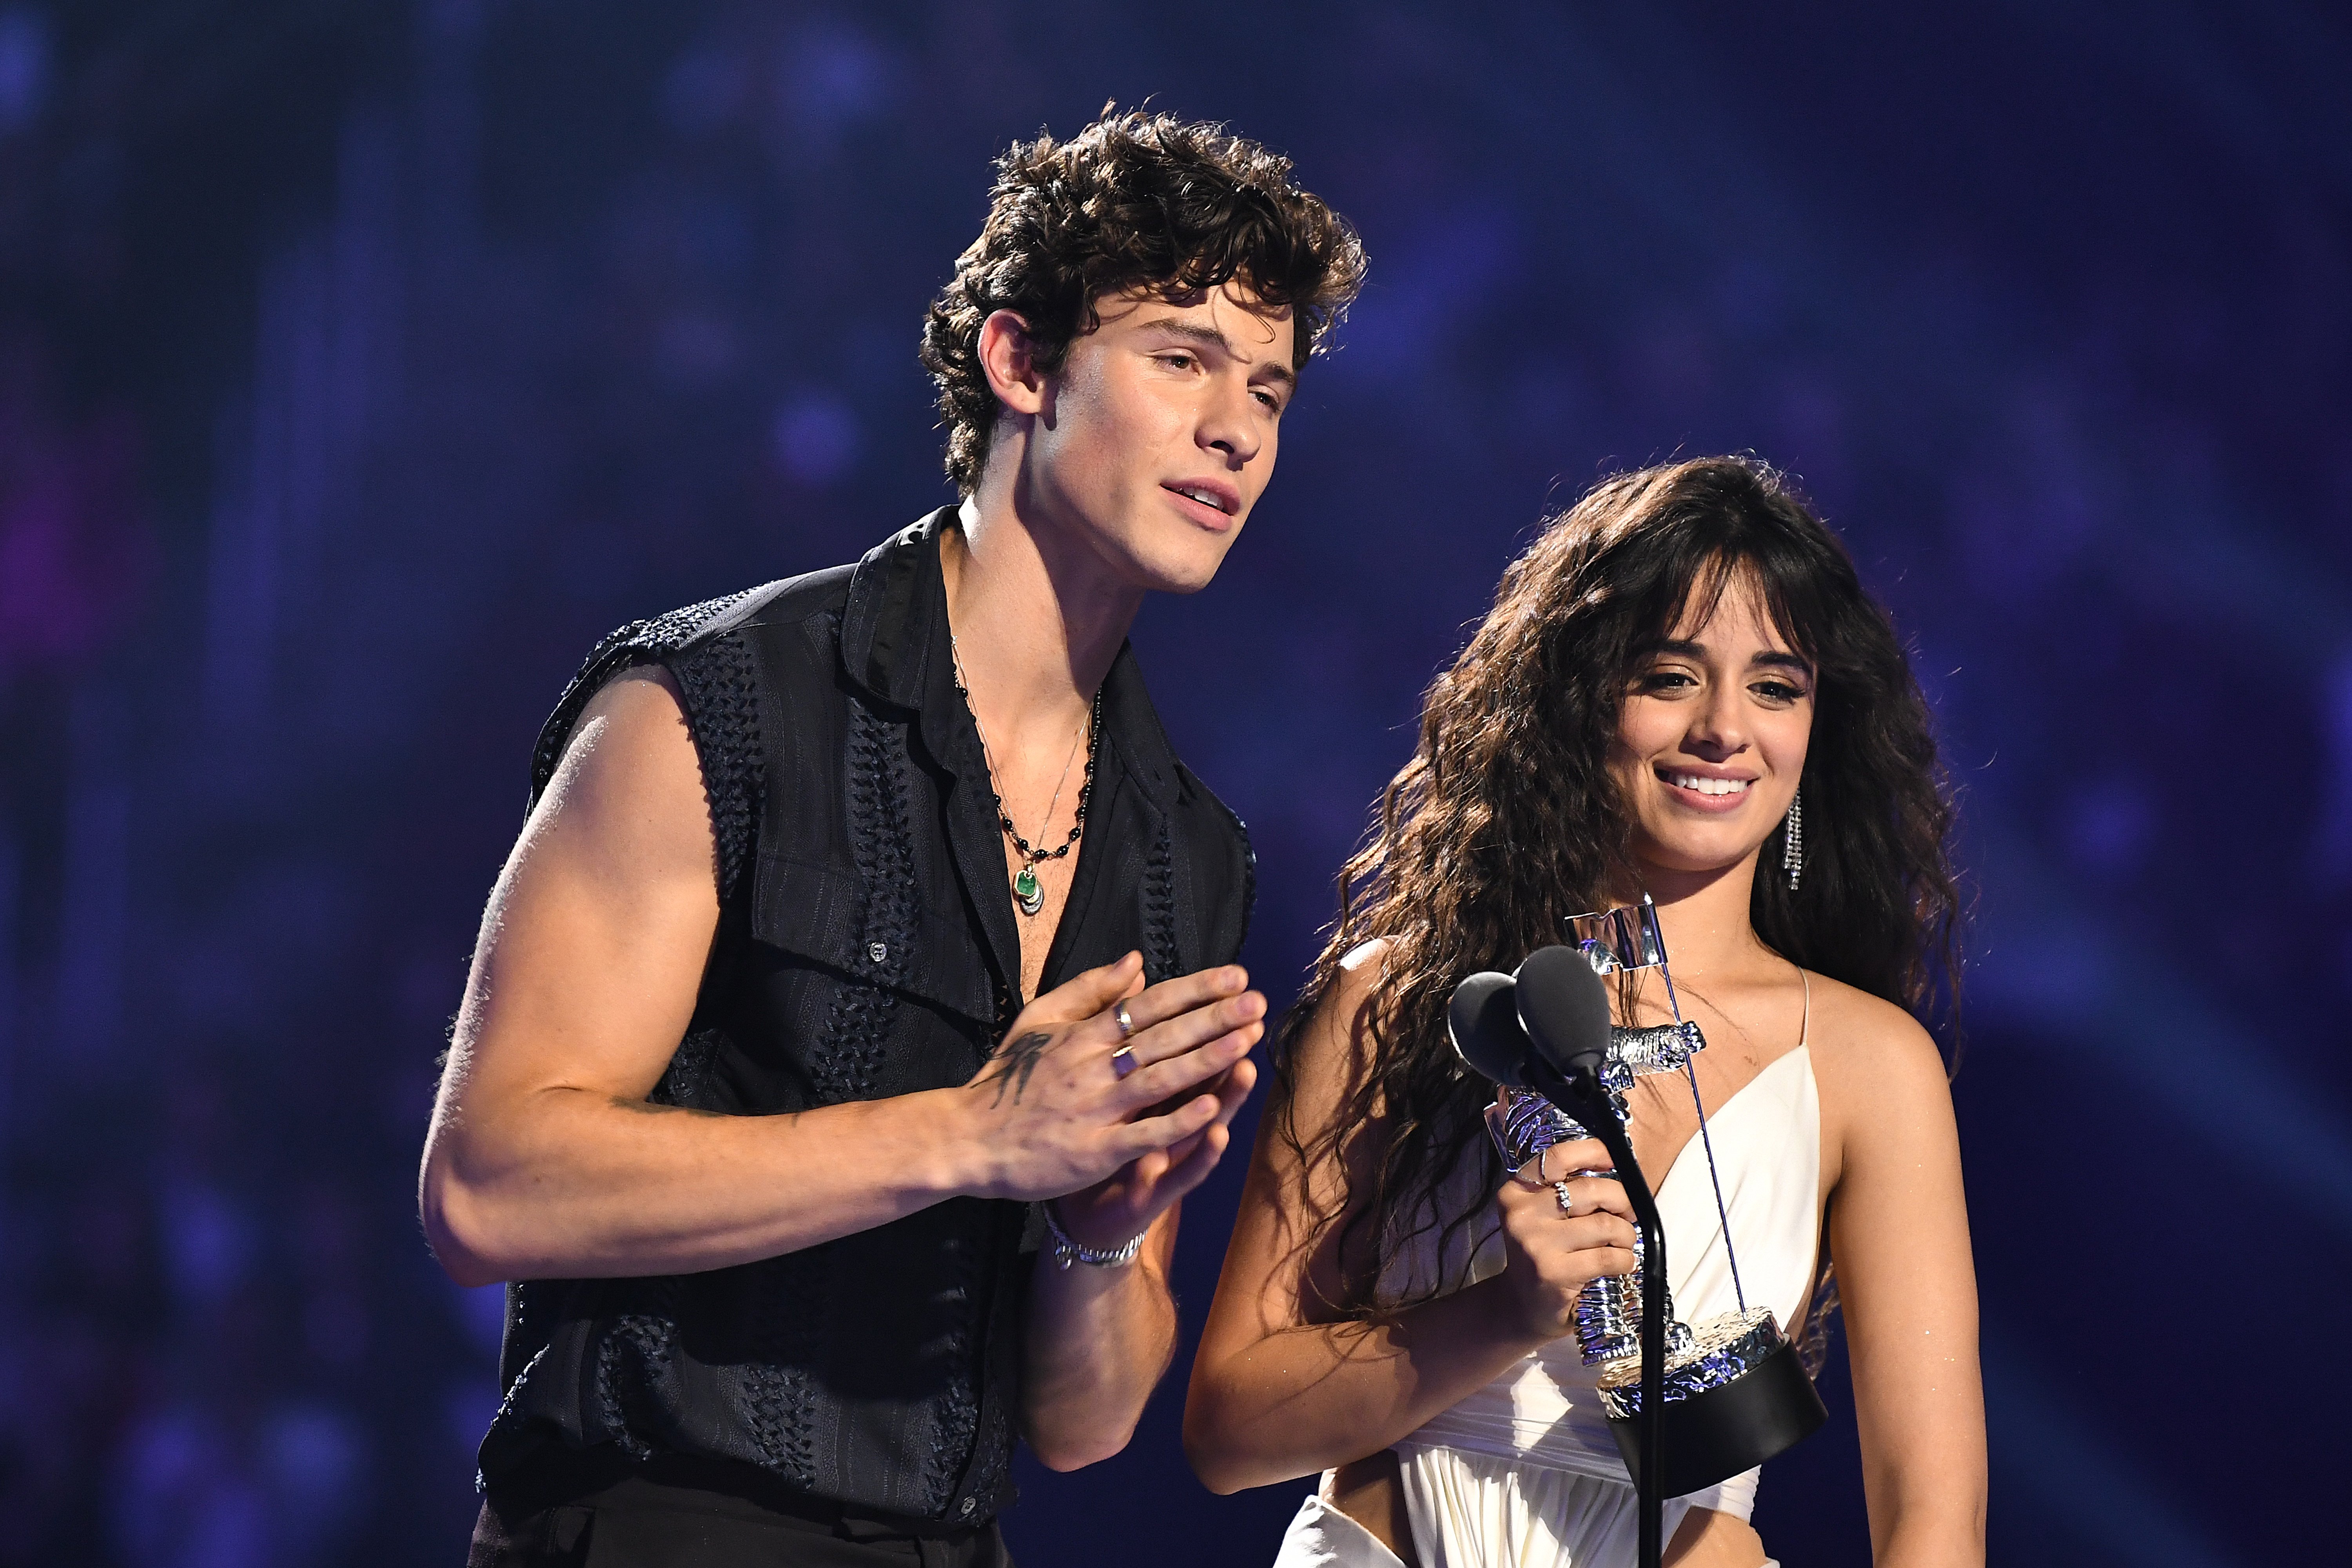 Shawn Mendes and Camilla Cabello receive the "Best Collaboration" award onstage at the 2019 MTV Video Music Awards on August 26, 2019, in Newark, New Jersey. | Source: Getty Images